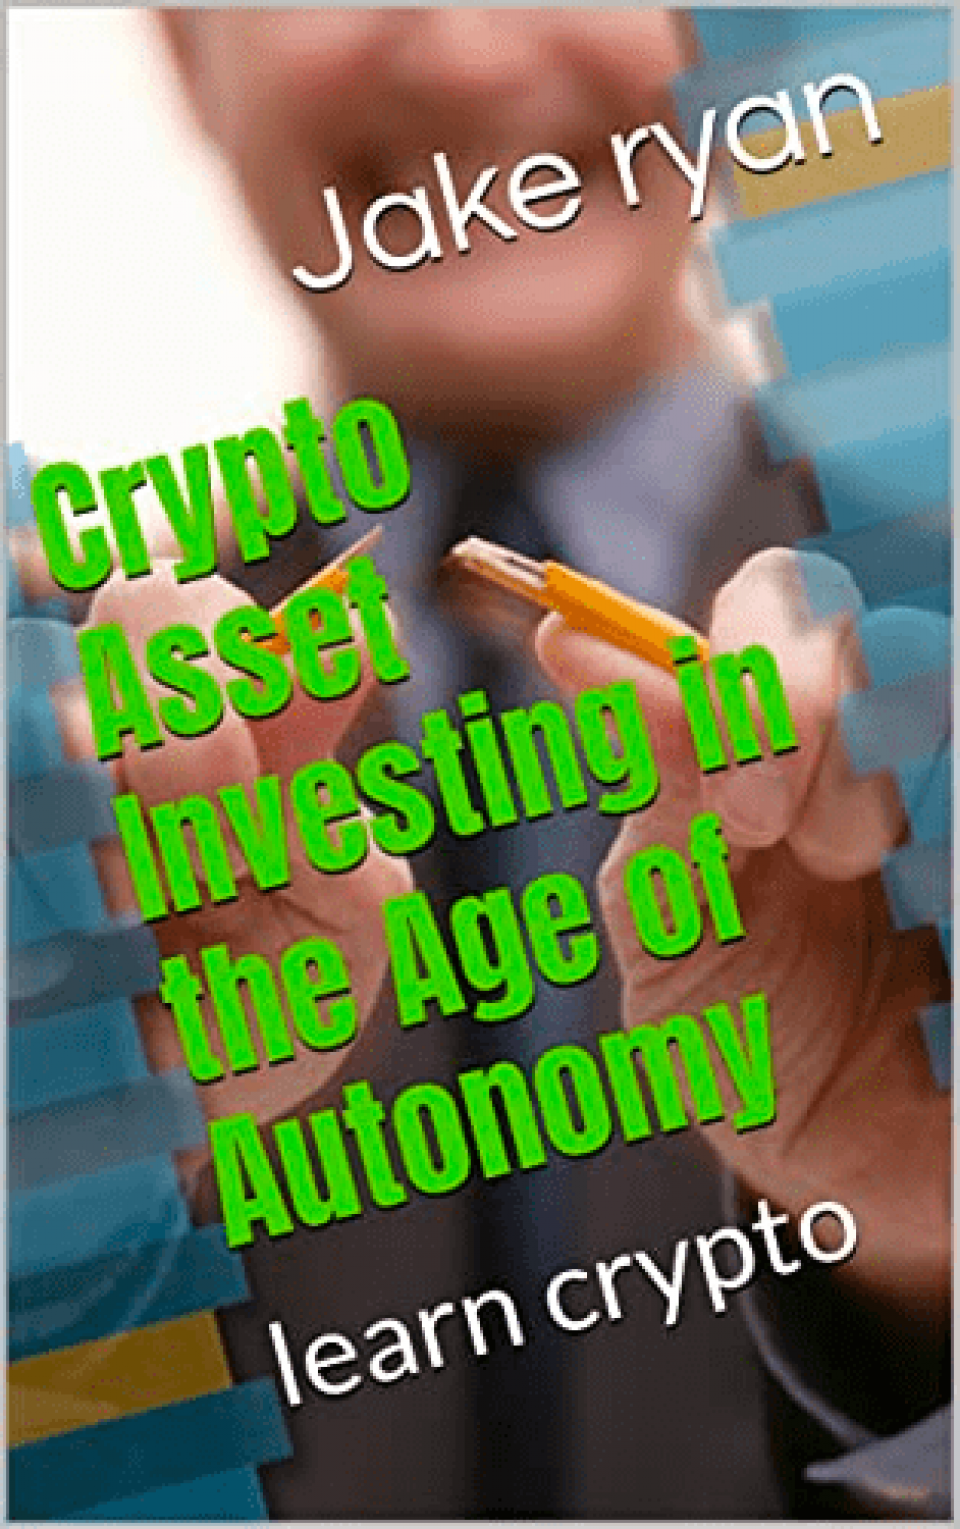 Front cover of Crypto Asset Investing in the Age of Autonomy.